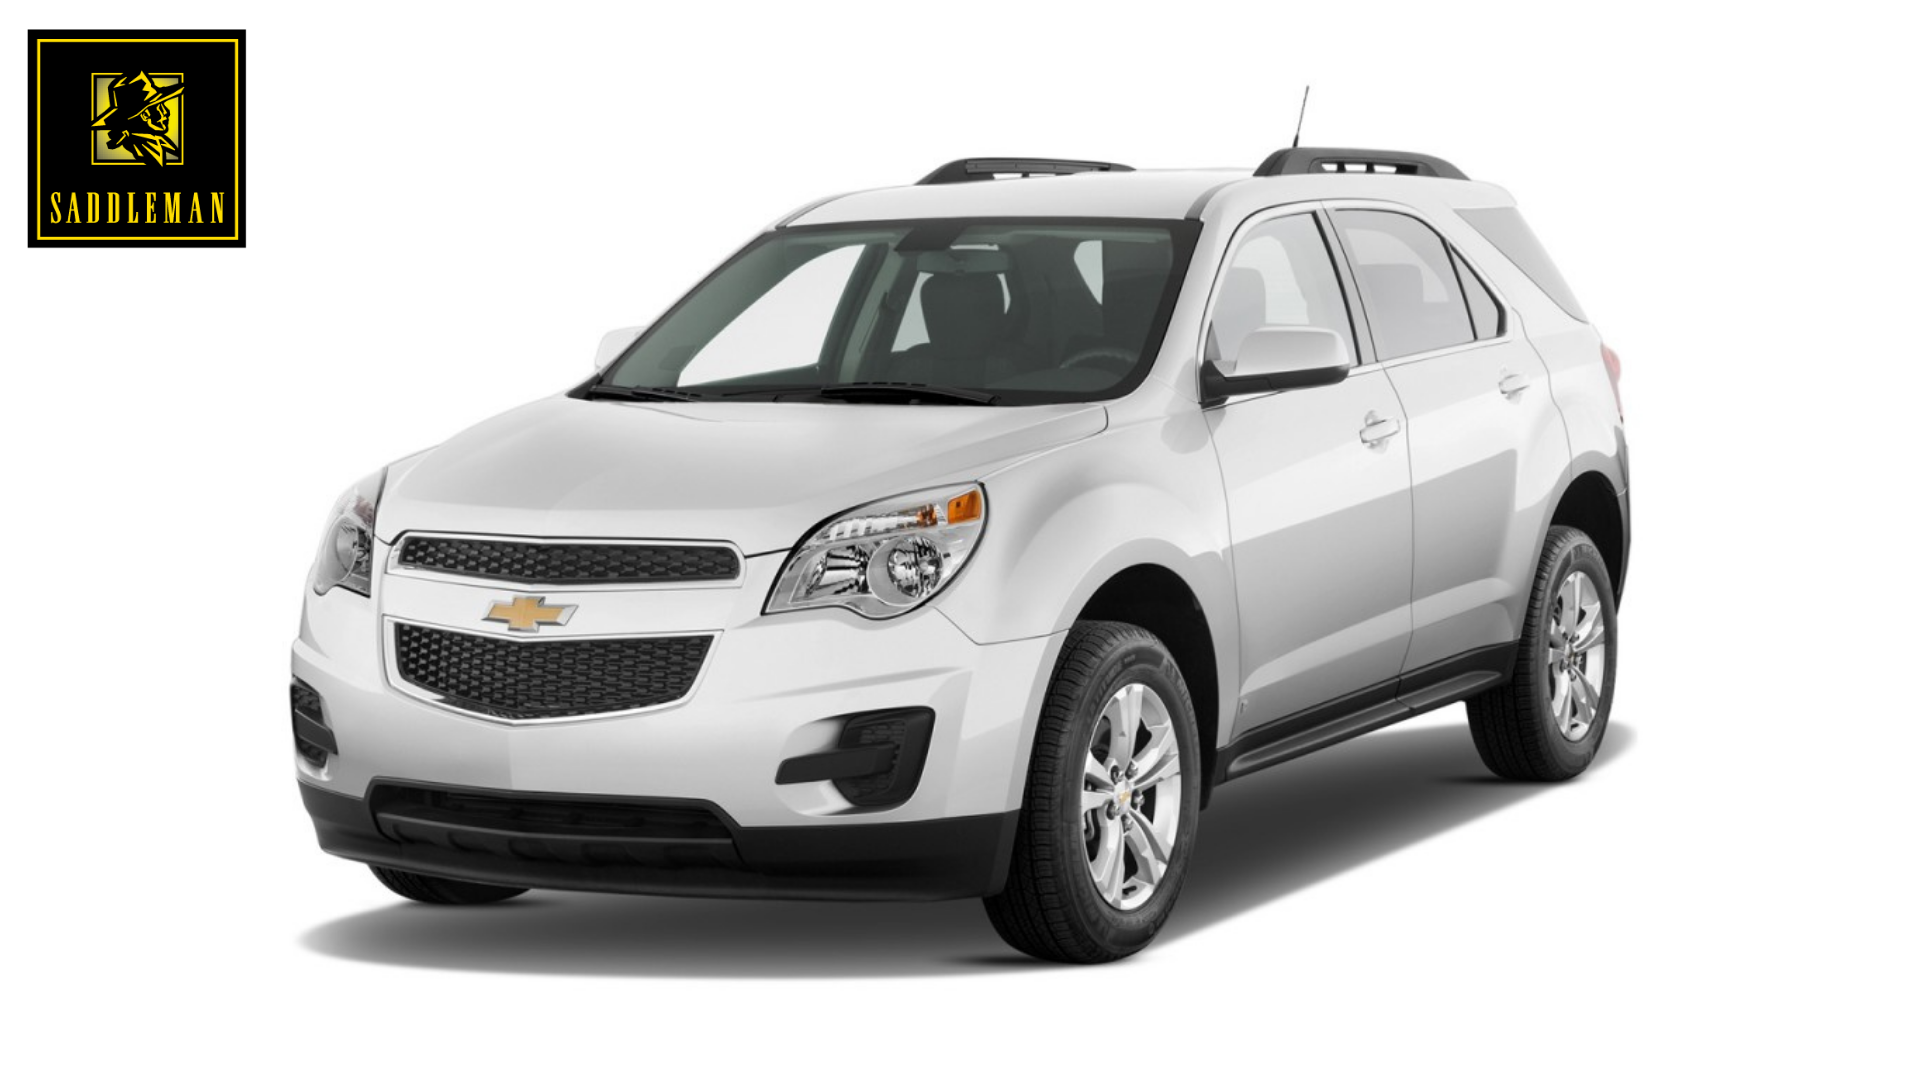 2014 Chevrolet Equinox Custom Fitted Seat Covers | Saddleman